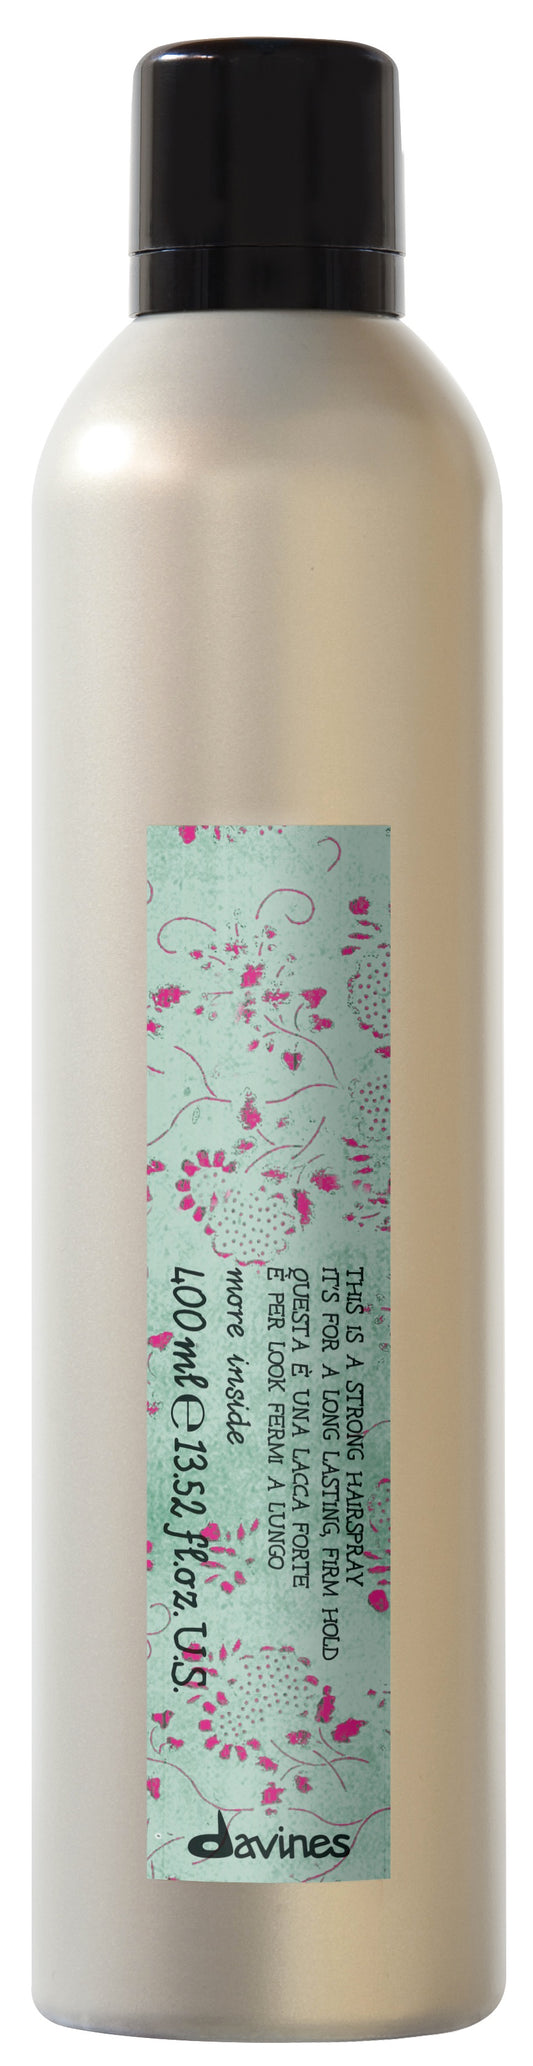 More Inside/ Strong Hairspray, Firm Hold 400ml